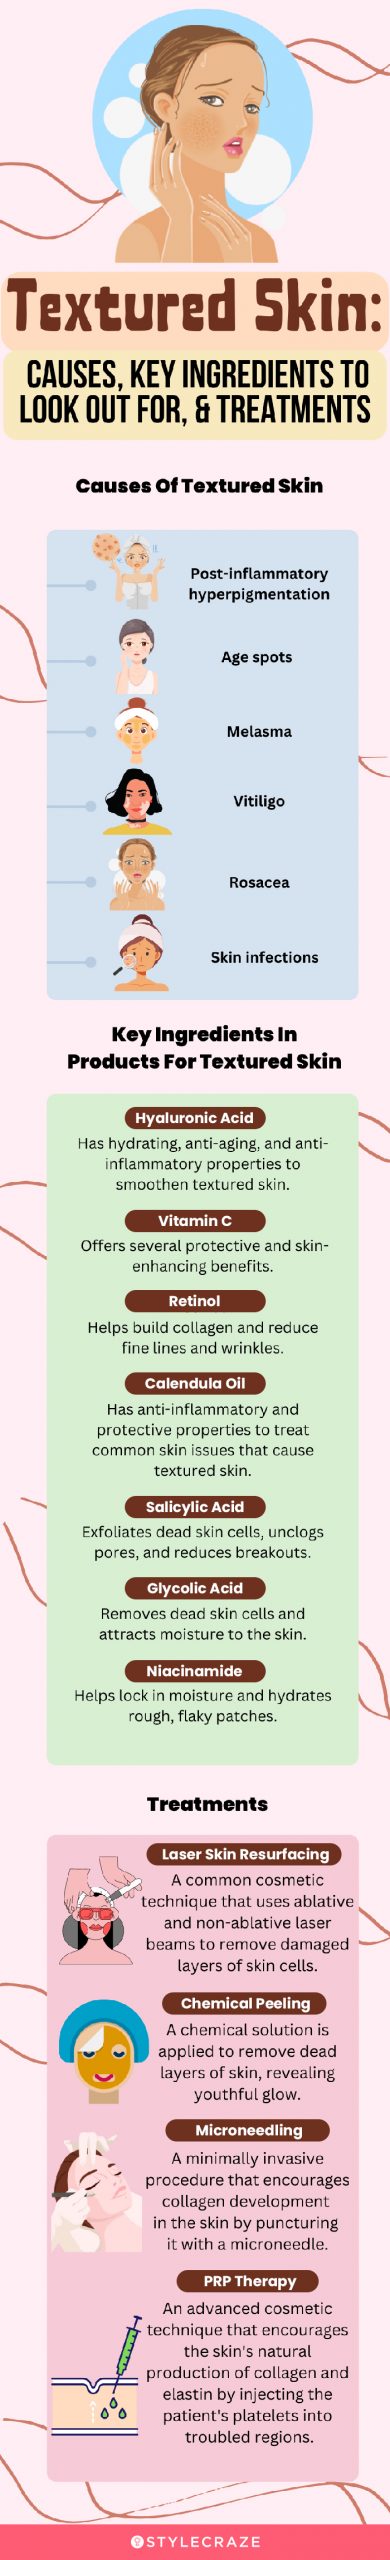 Textured Skin & Its Causes (infographic)